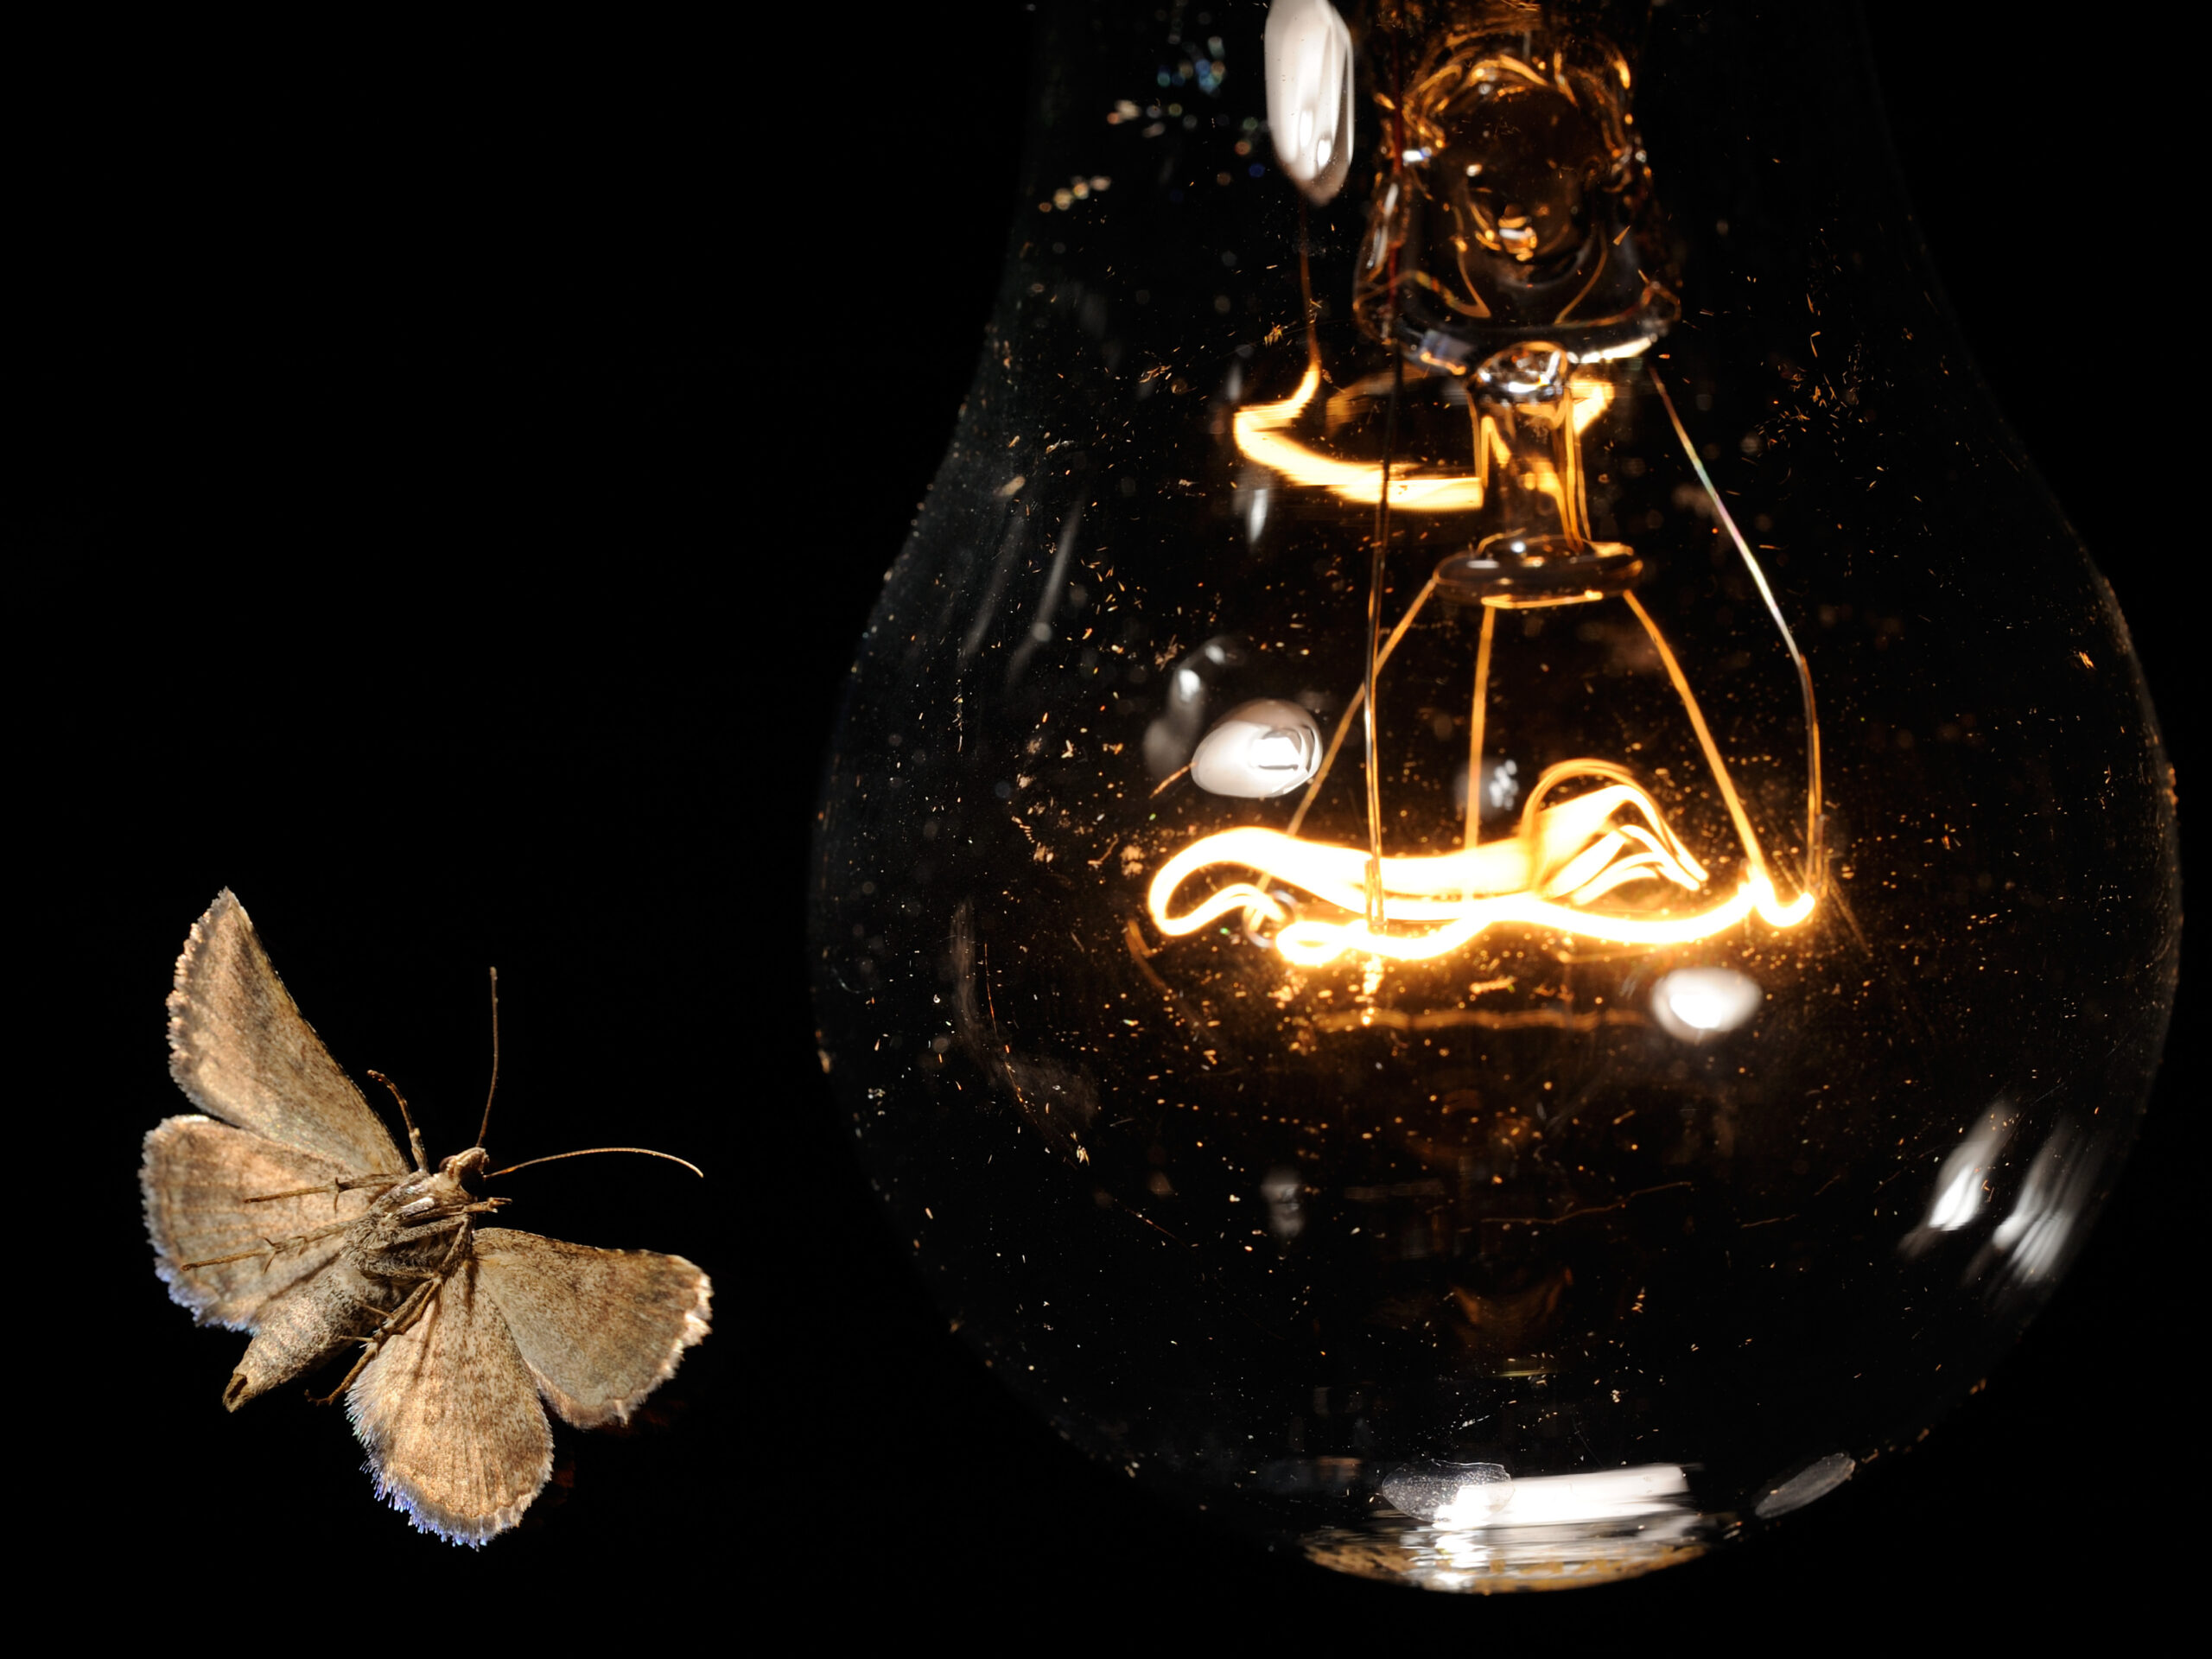 ‘Like moths to a flame’? Here’s what’s going on with insects and porch lights